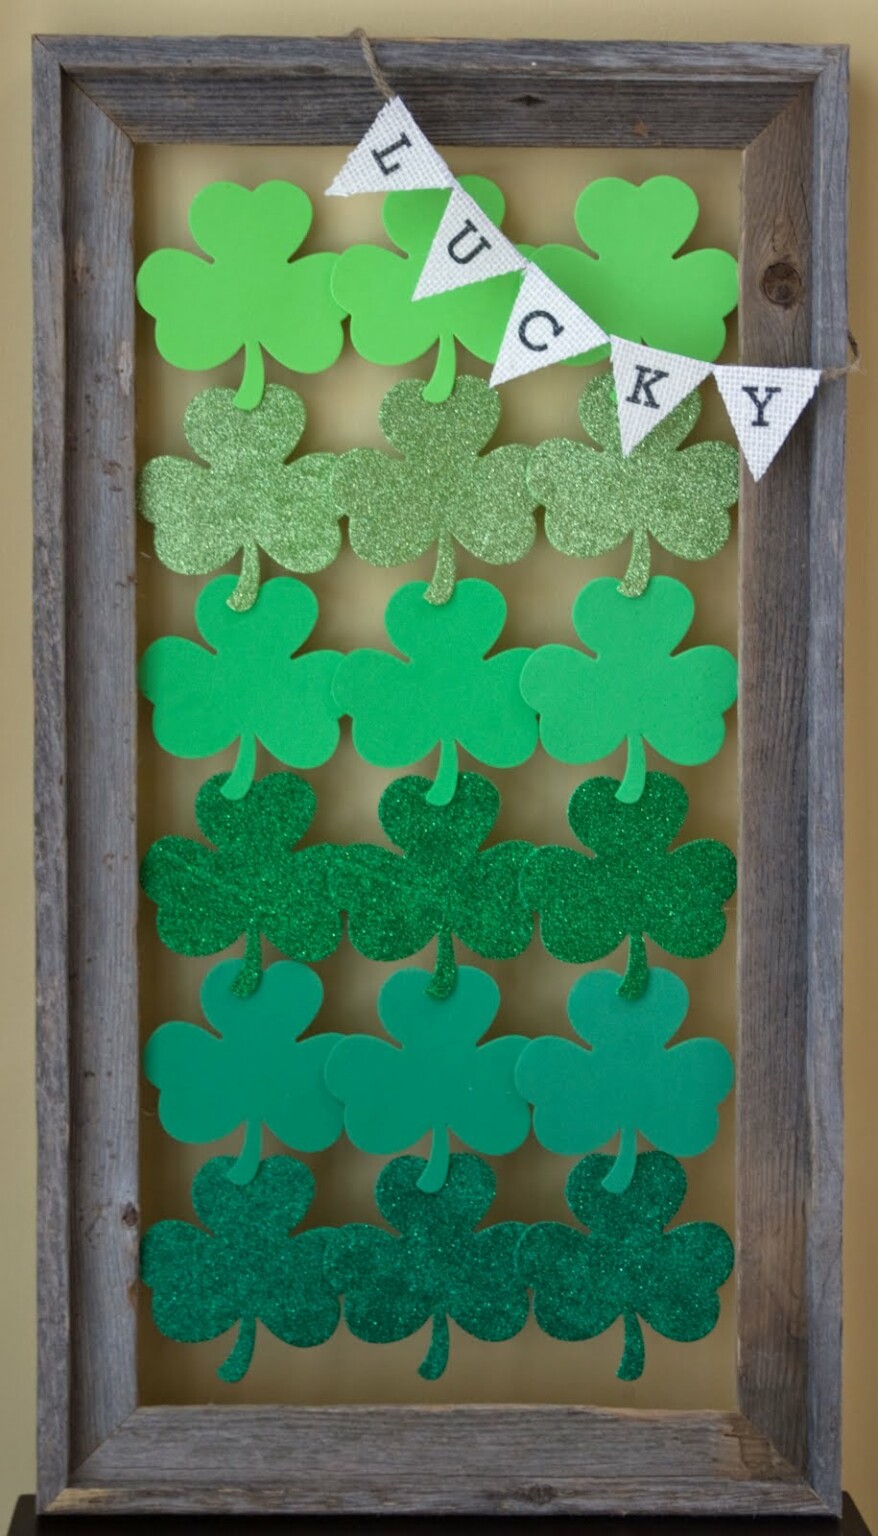 st-patrick-decoration-ideas-17-great-diy-projects-to-make